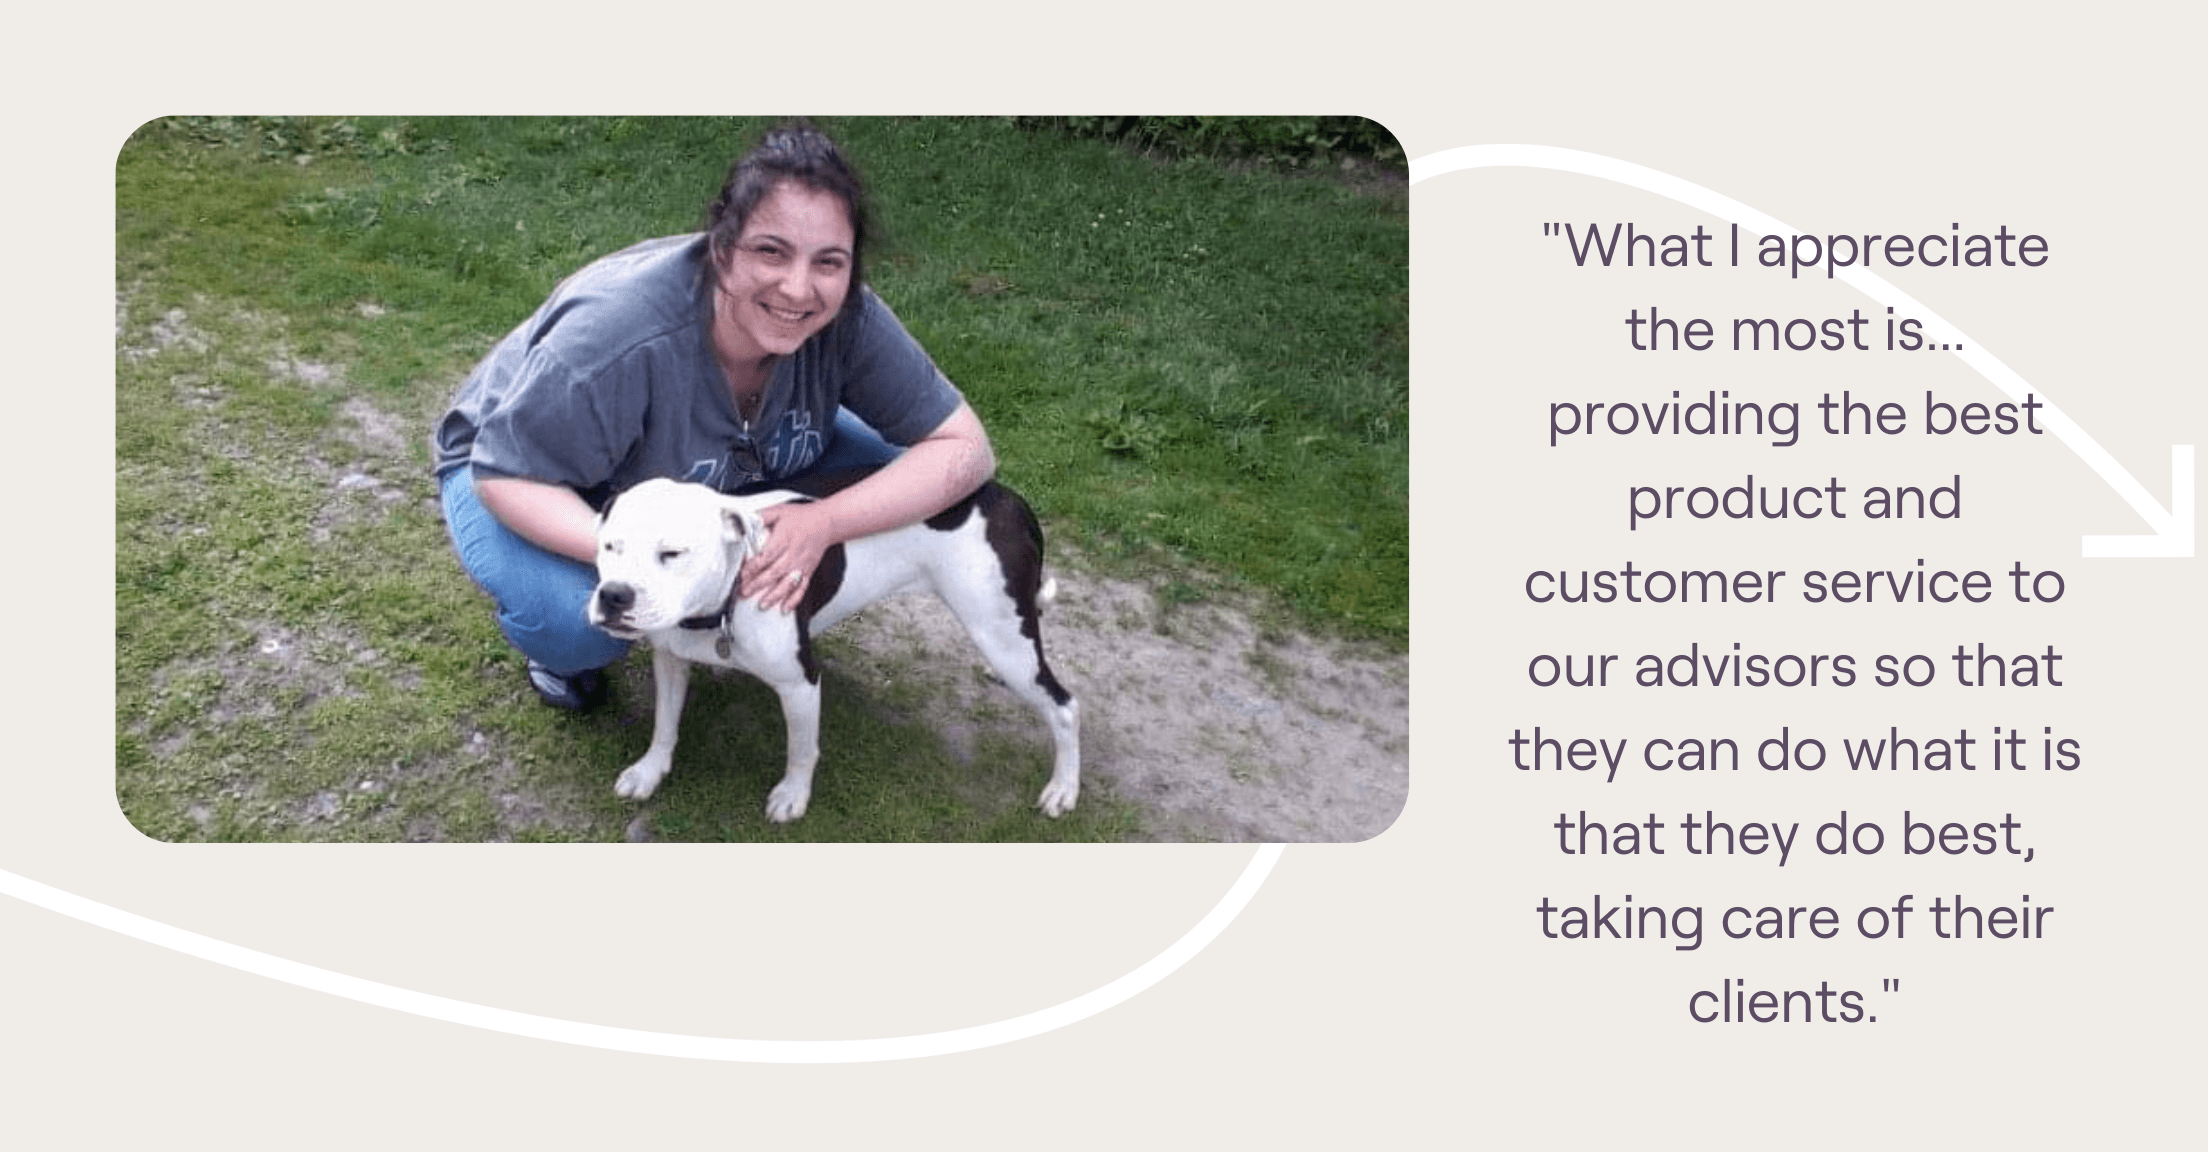 Jenn, Business Operations Specialist says "What I appreciate most is...providing the best product and customer service to our advisors so that they can do what it is that they do best, taking care of their clients."